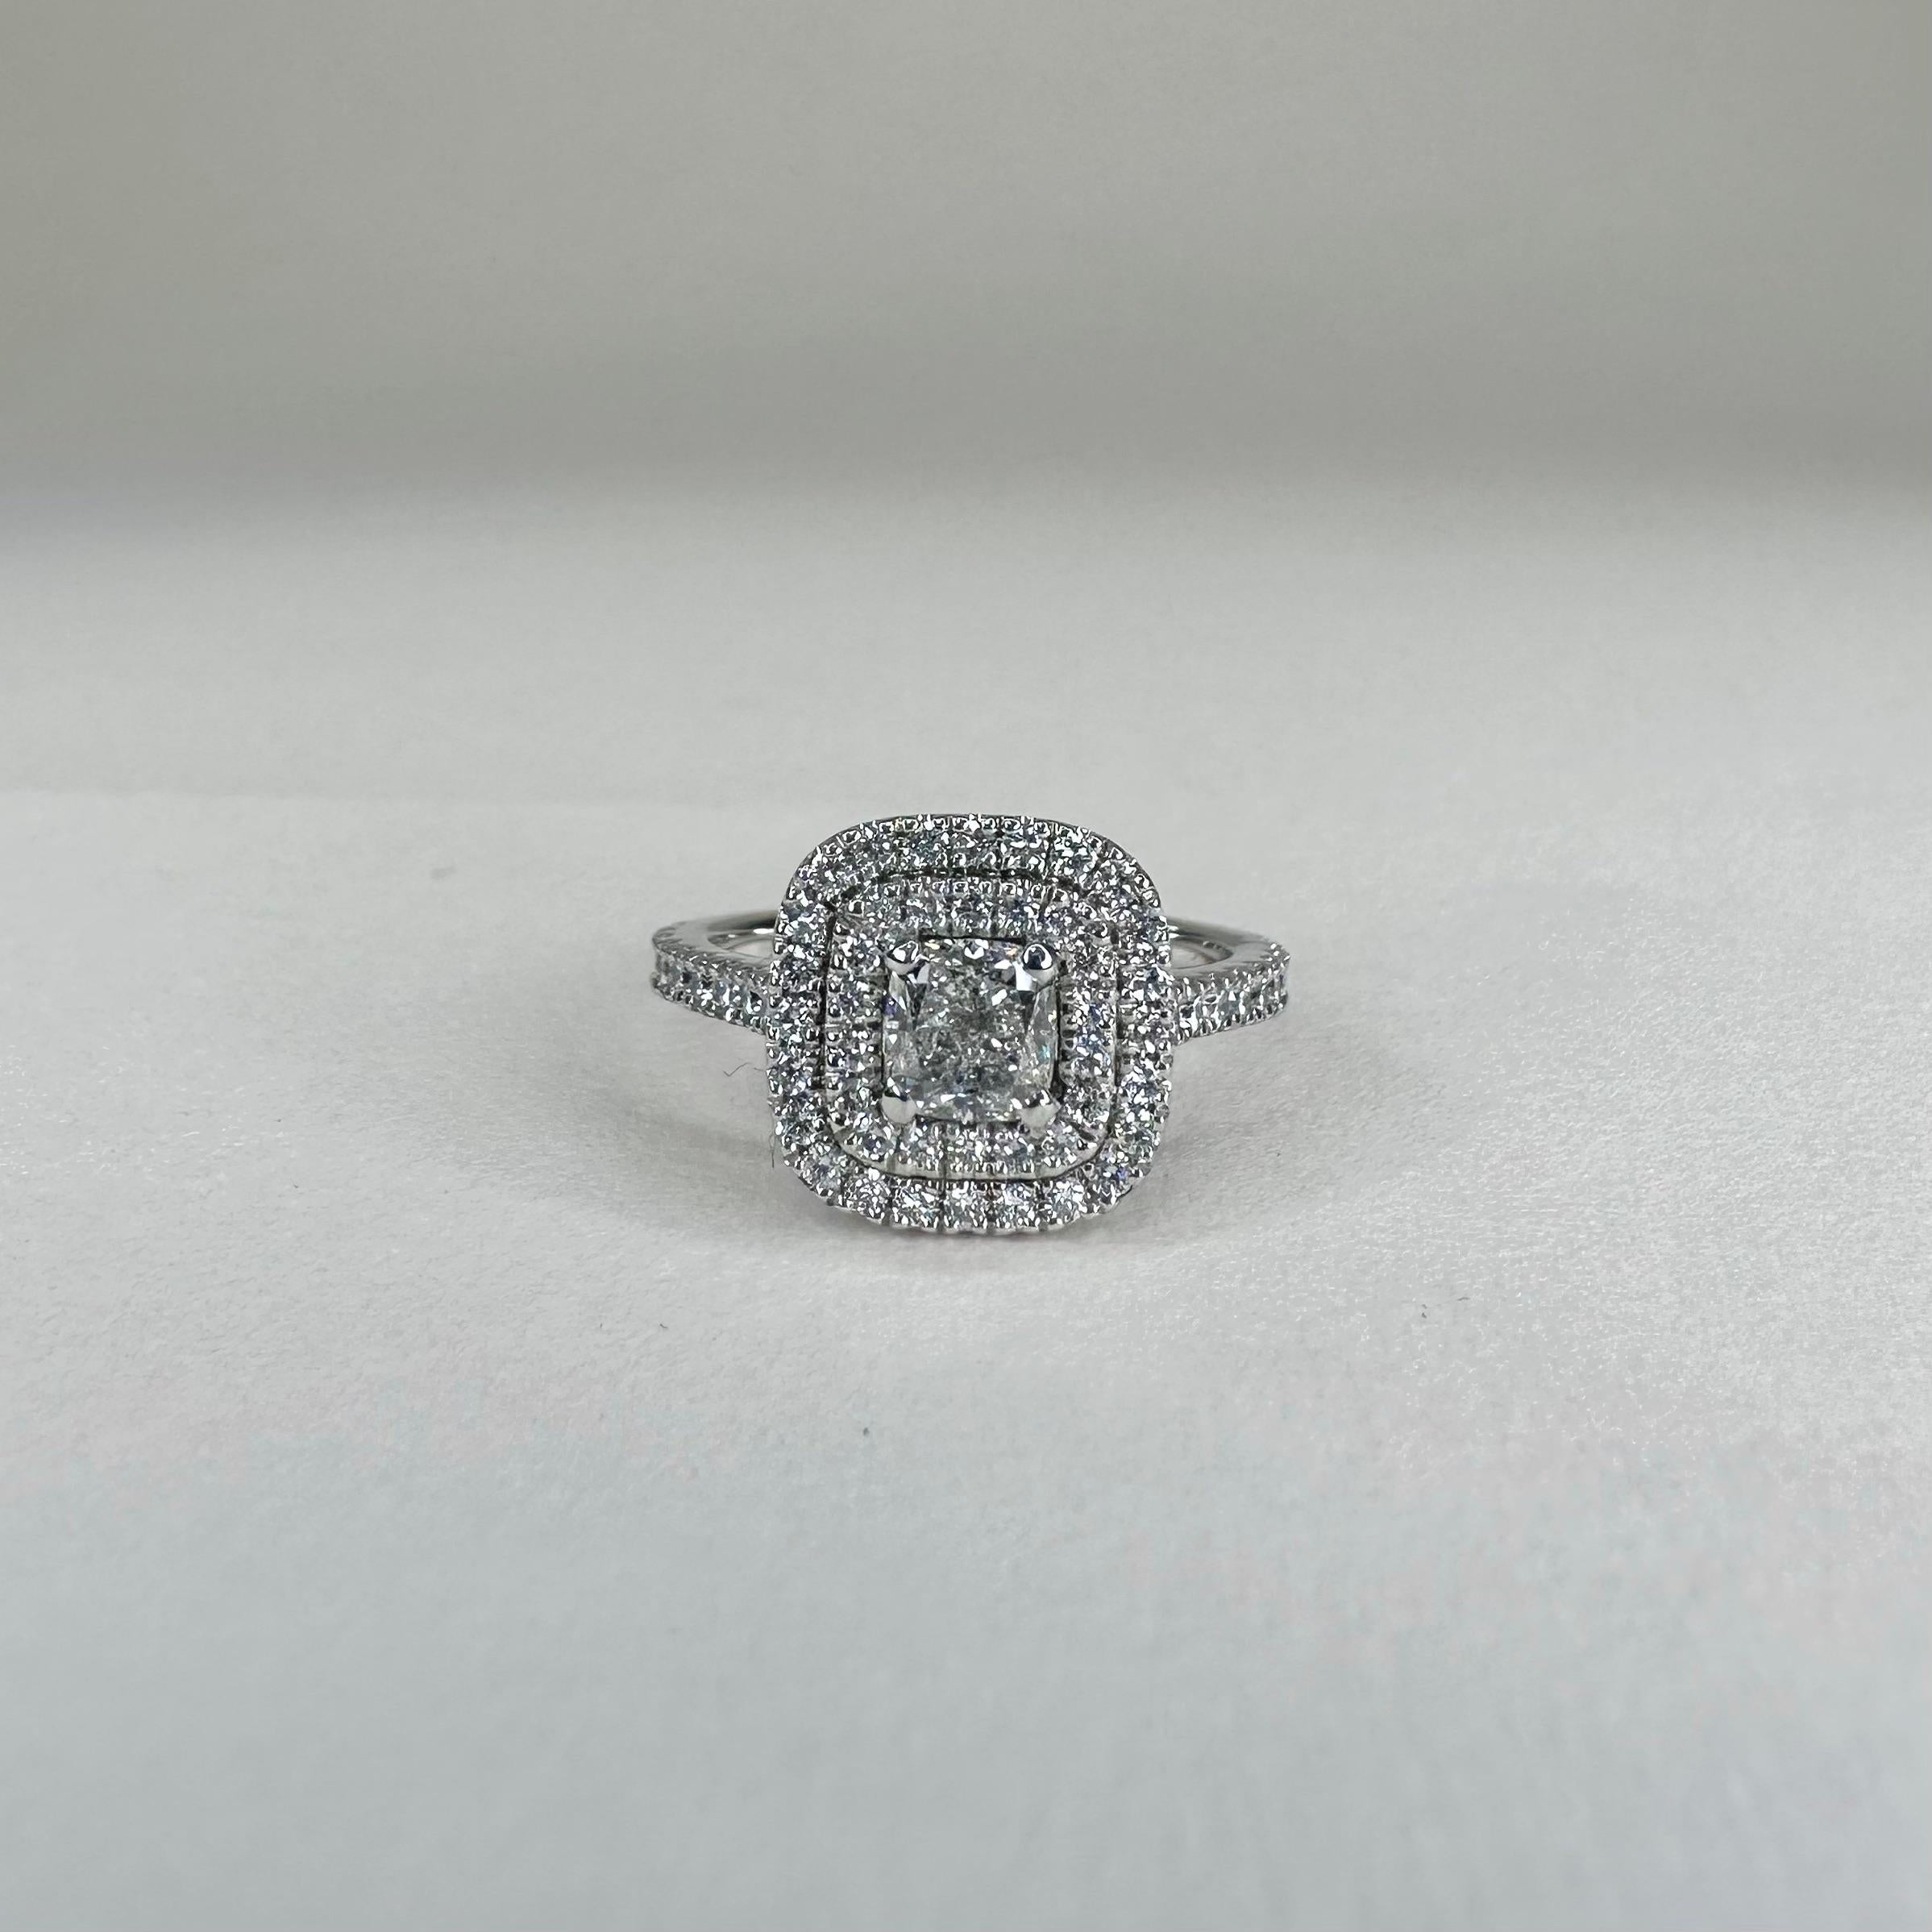 For Sale:  Art Deco Style 18k White Gold 0.70 Ct Diamond Ring GIA Certified with 0.55 Cts 4